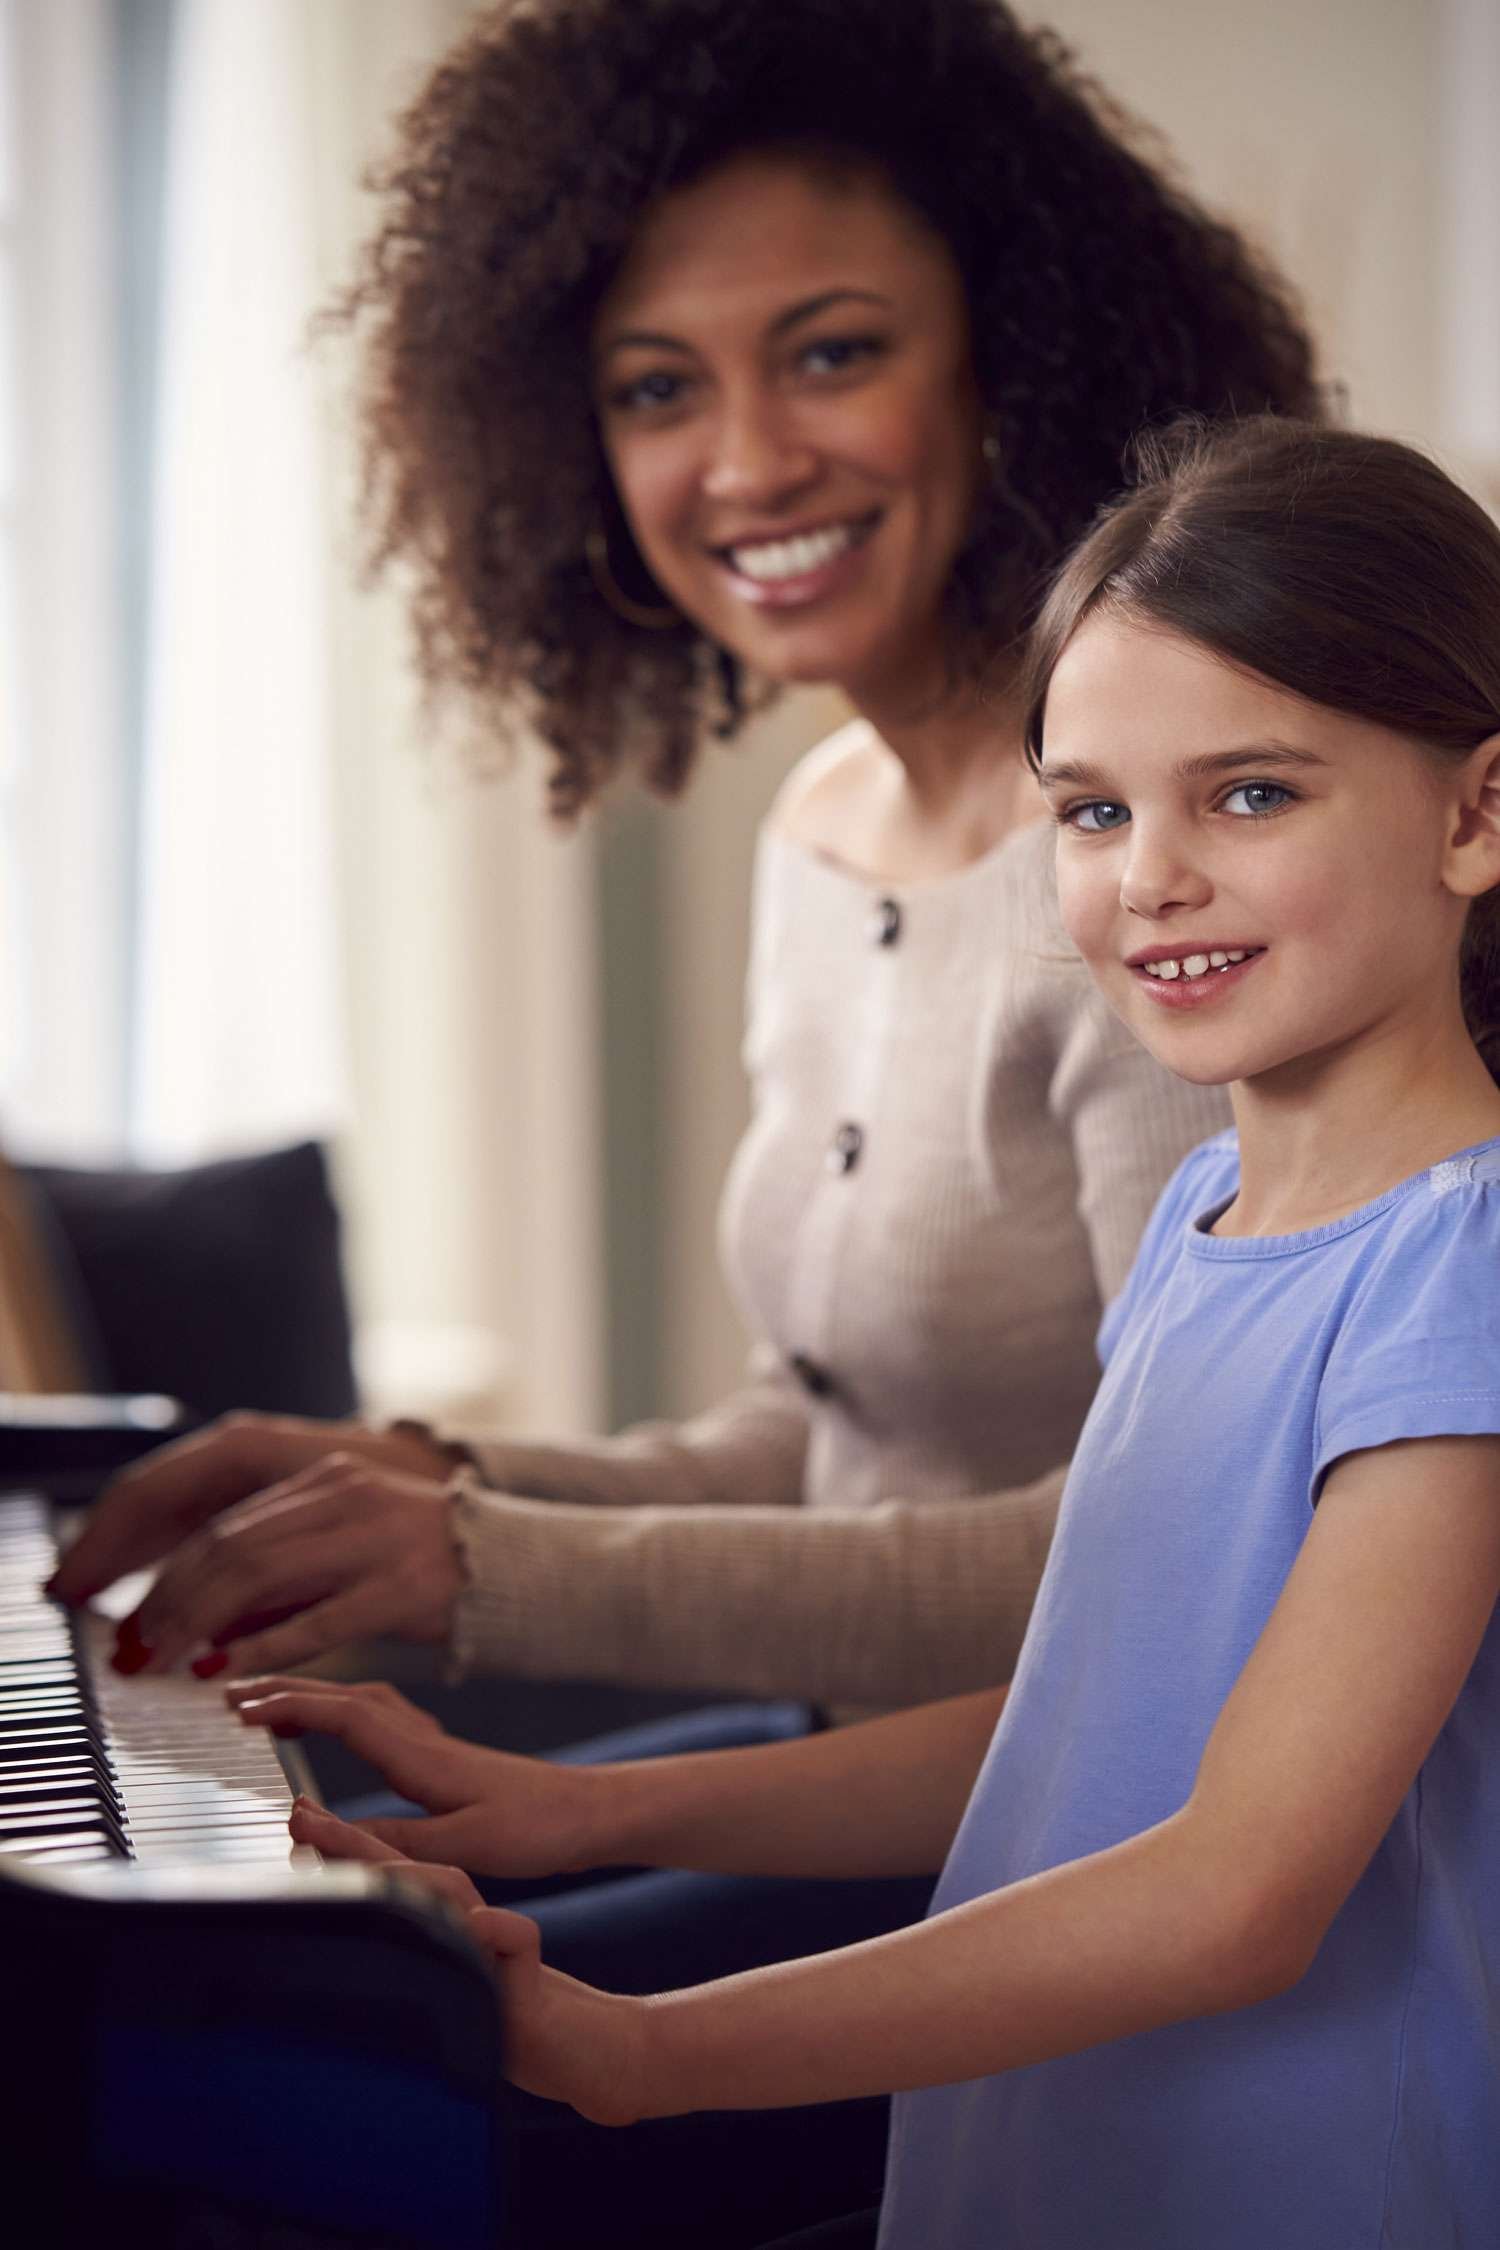 piano instructor and her young female student hands on the piano smiling at the camera